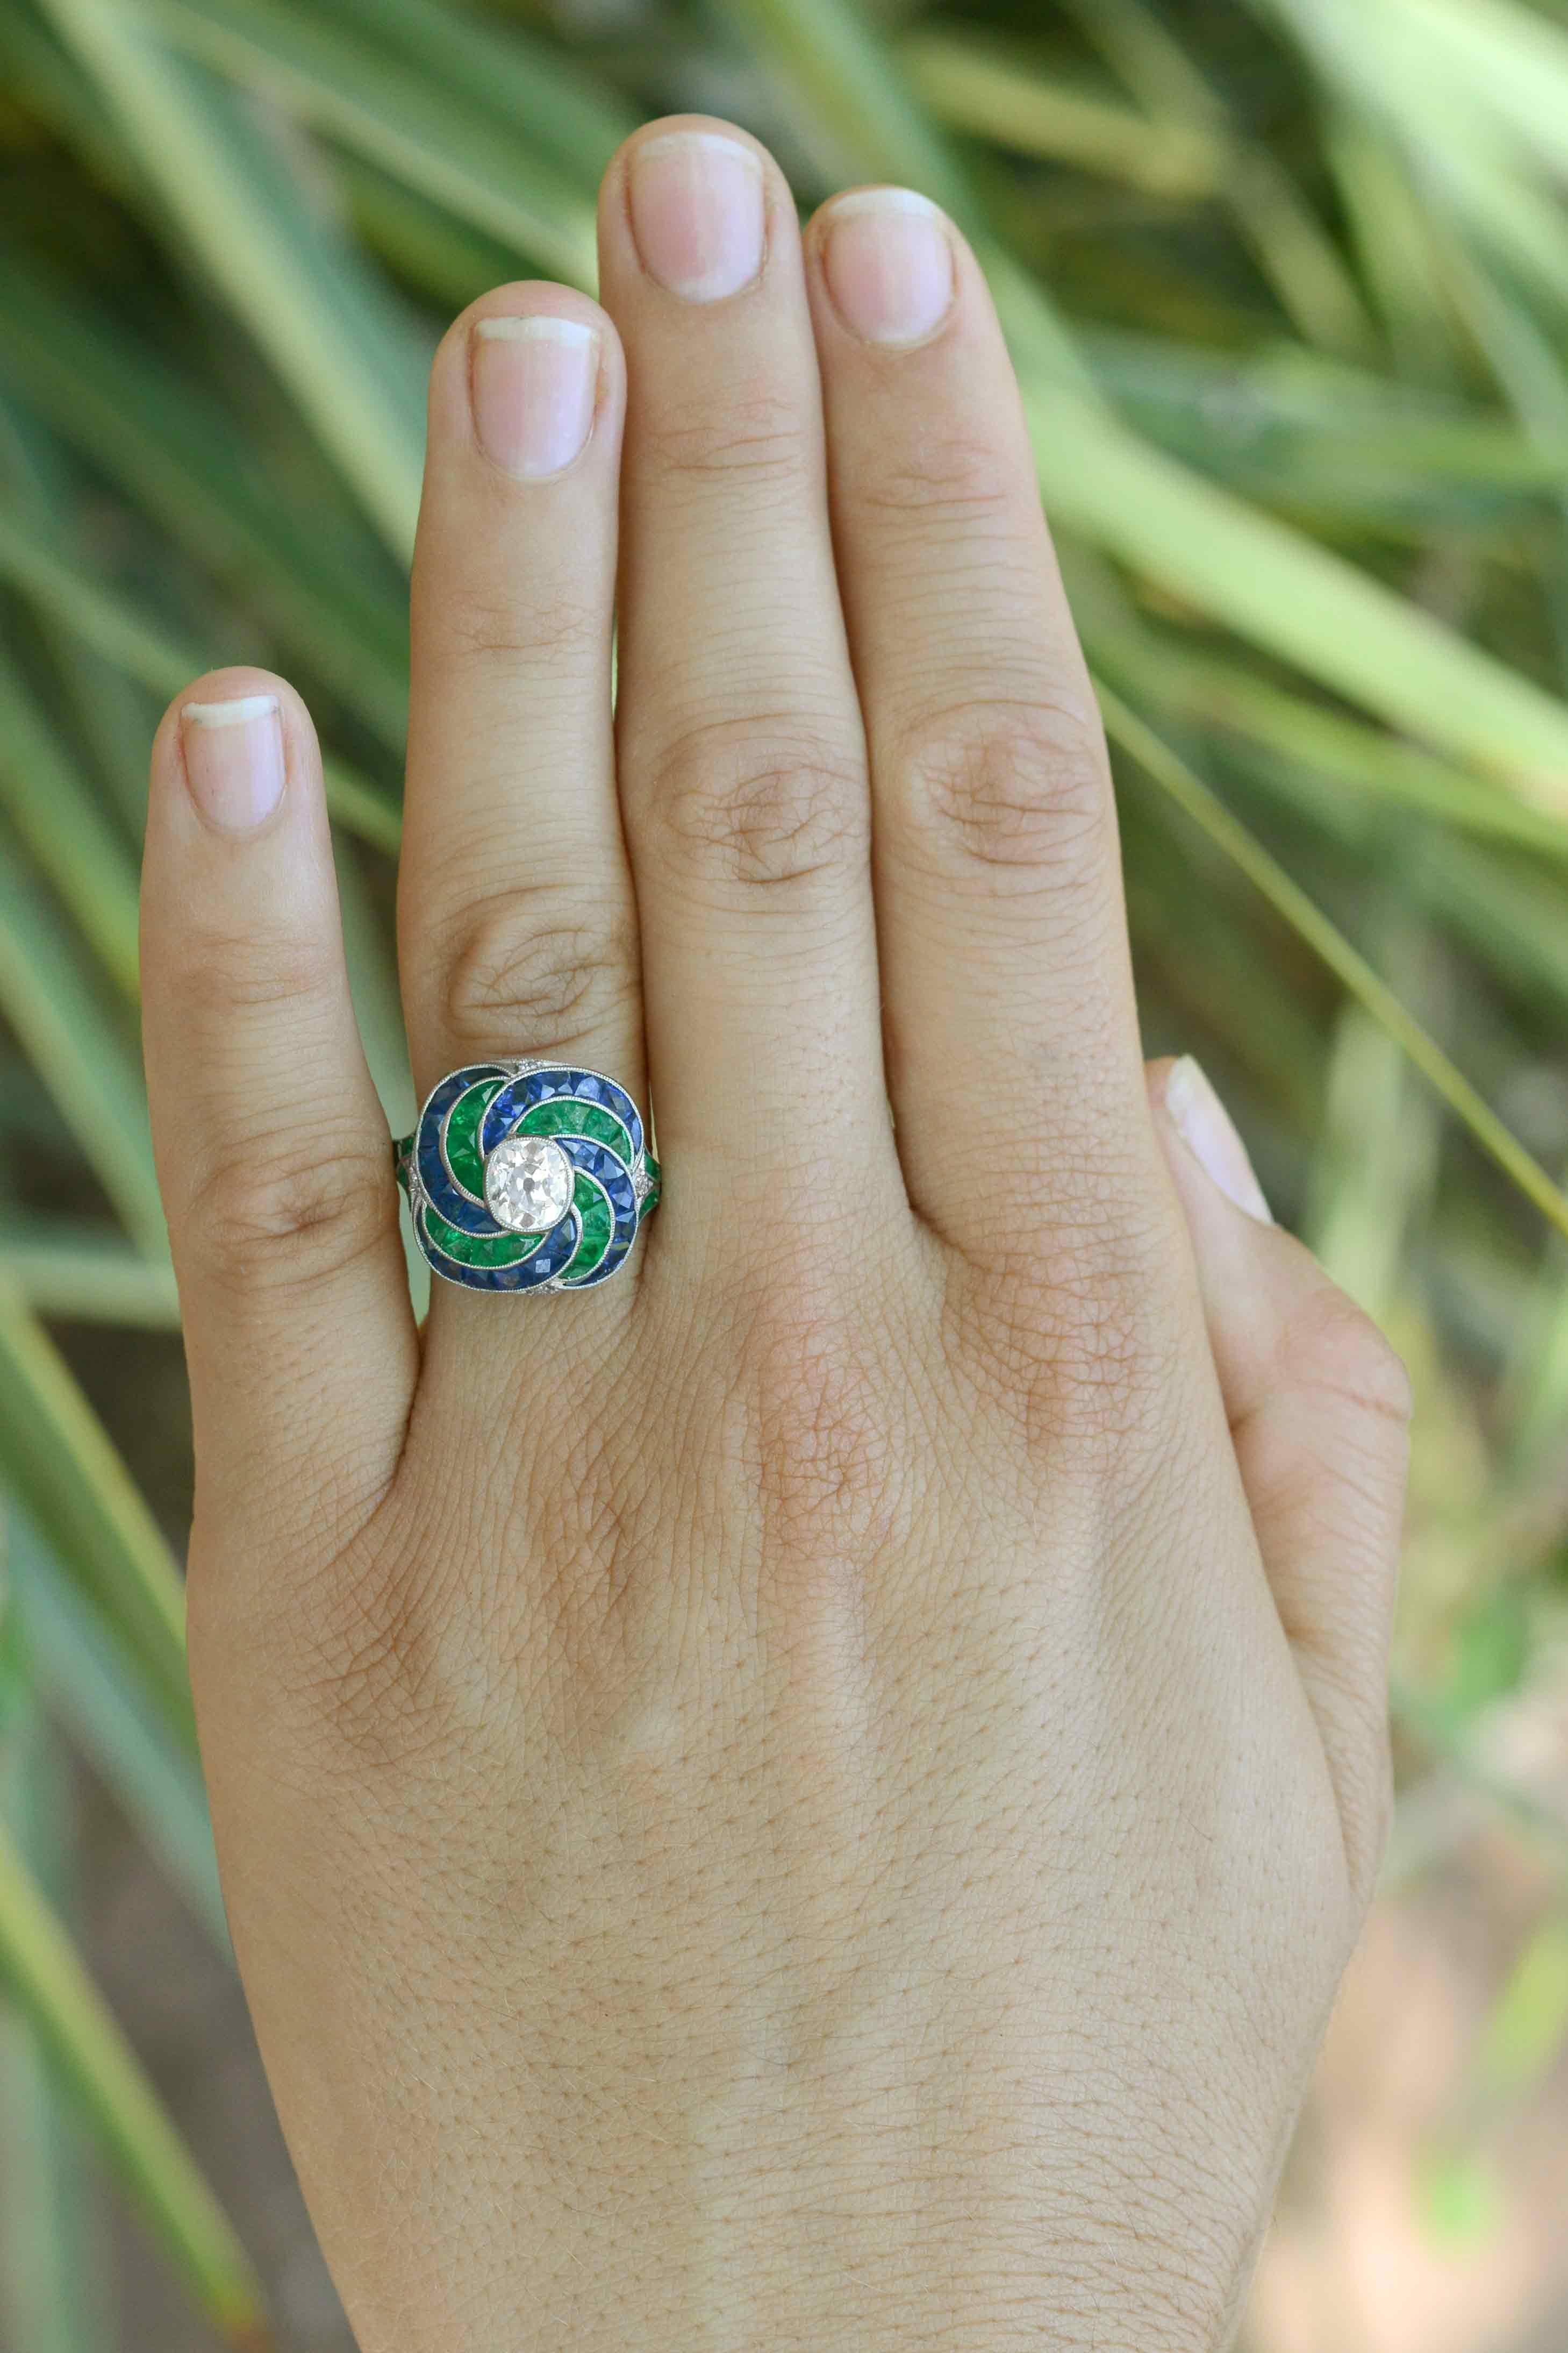 A mesmerizing ensemble of diamond, emerald and sapphire, a swirling engagement ring. This Art Deco inspired, handmade platinum masterpiece, a faithful emulation of an antique Jazz Age 1920s heirloom centers upon an antique, old mine cut diamond near